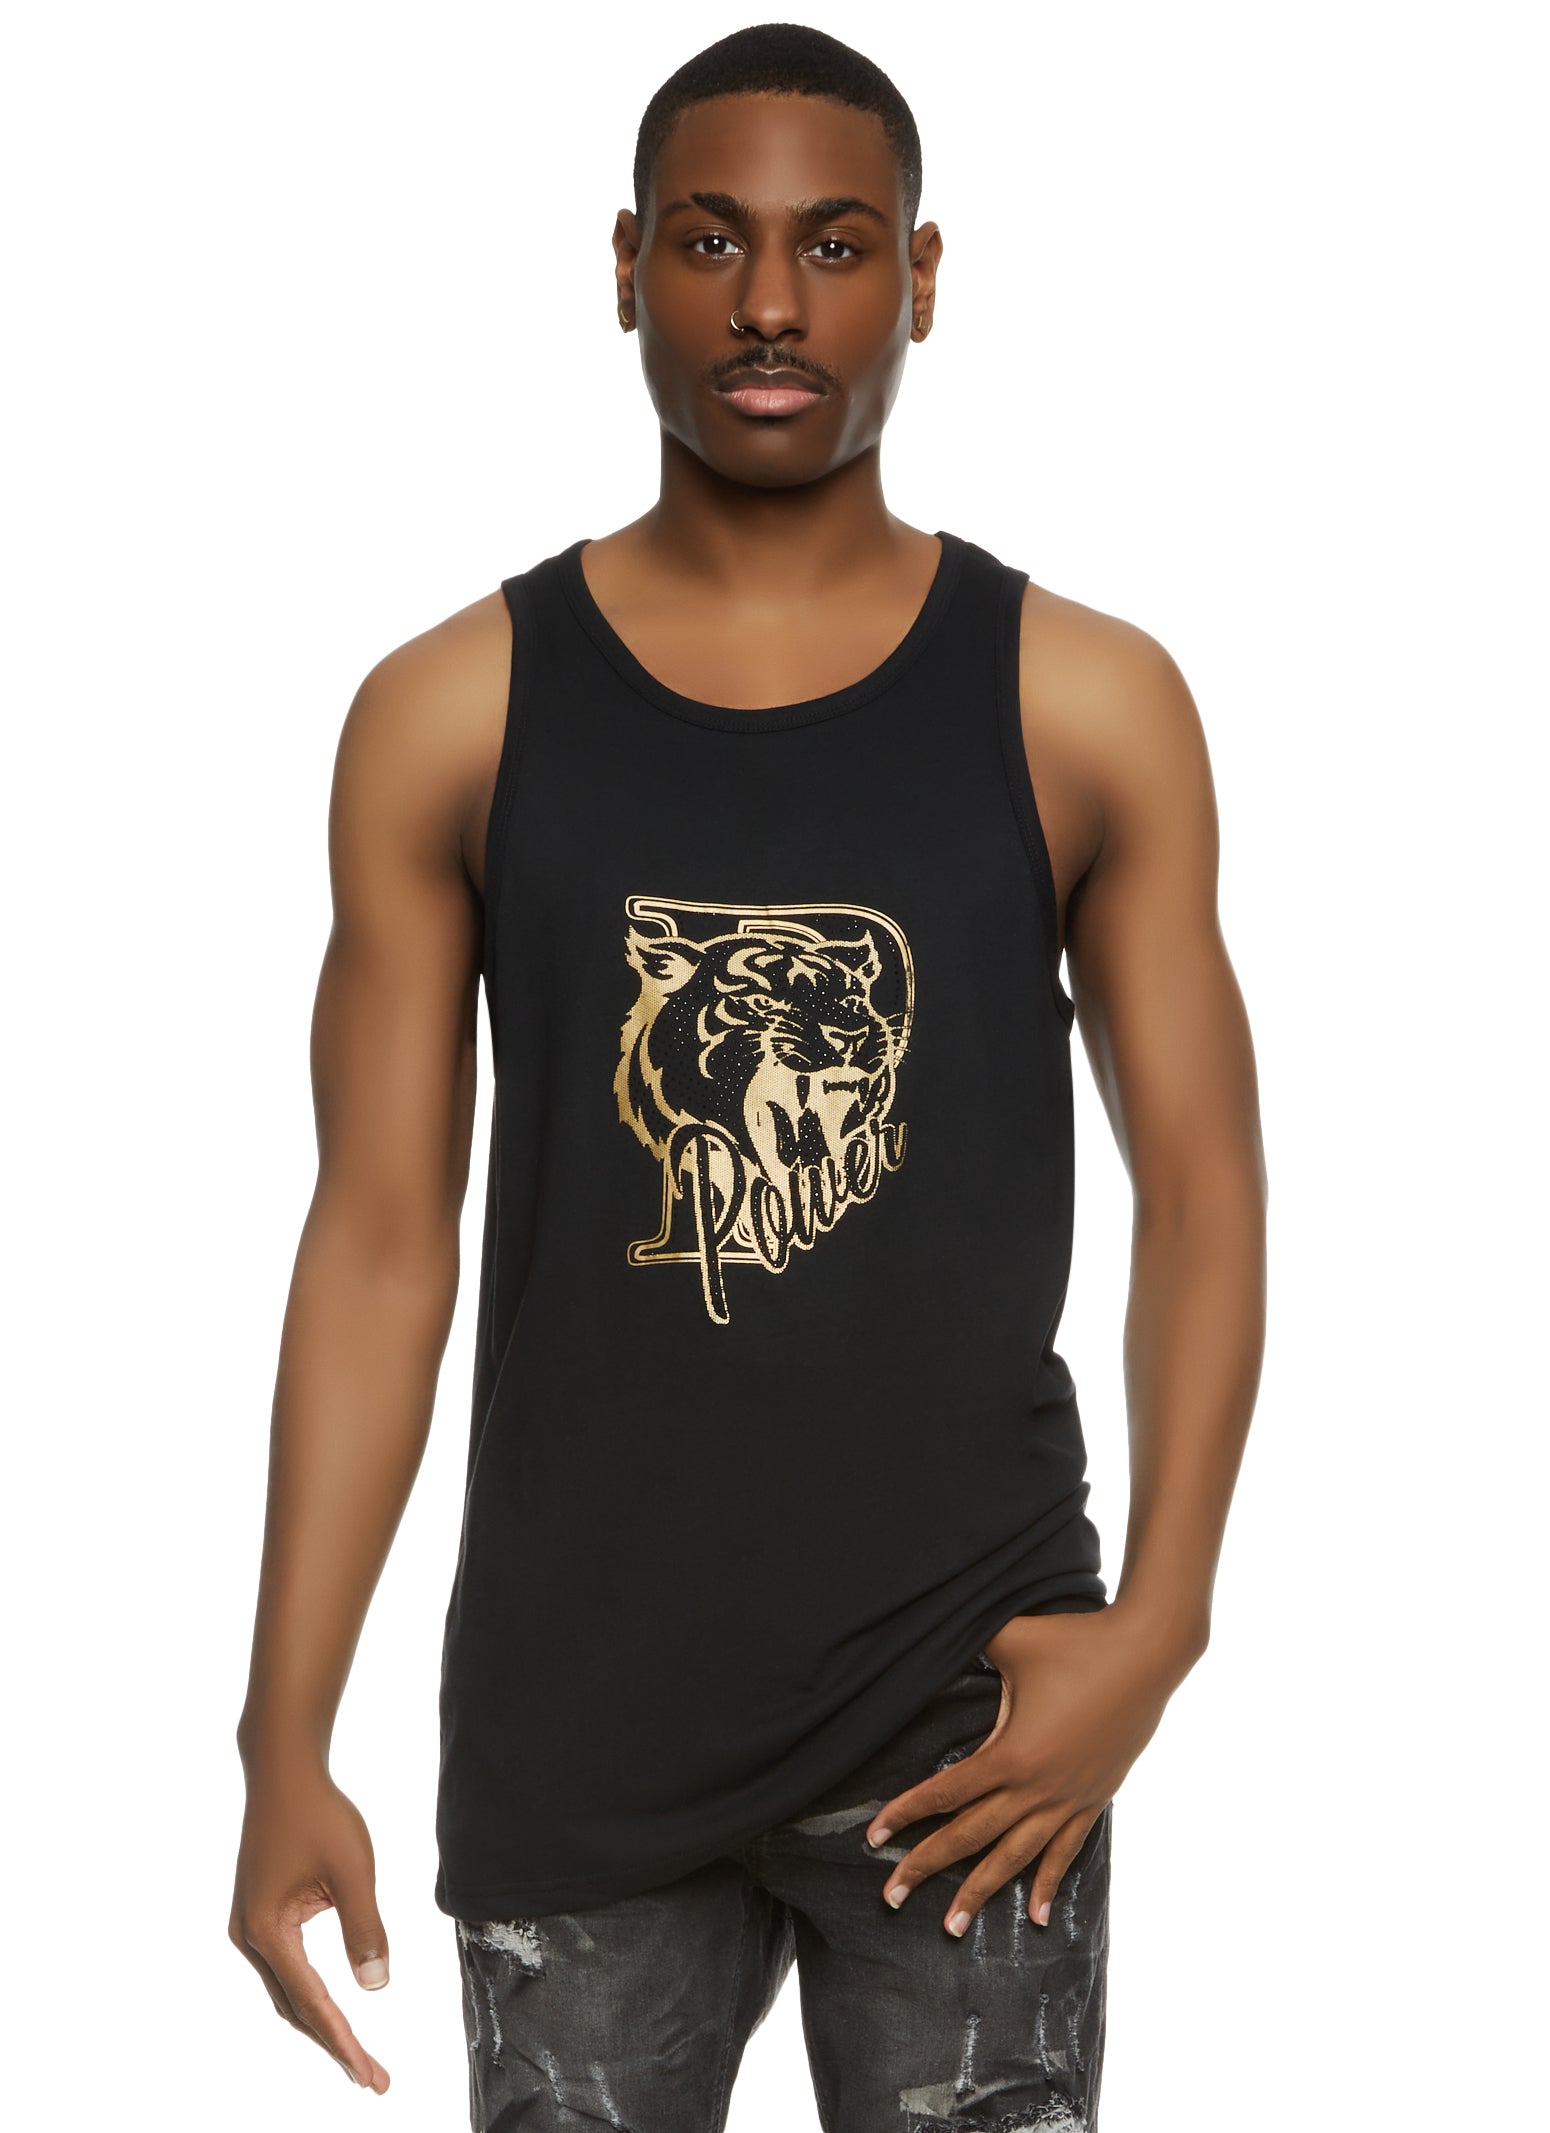 Womens Mens Tiger Power Graphic Tank Top, Black, Size S